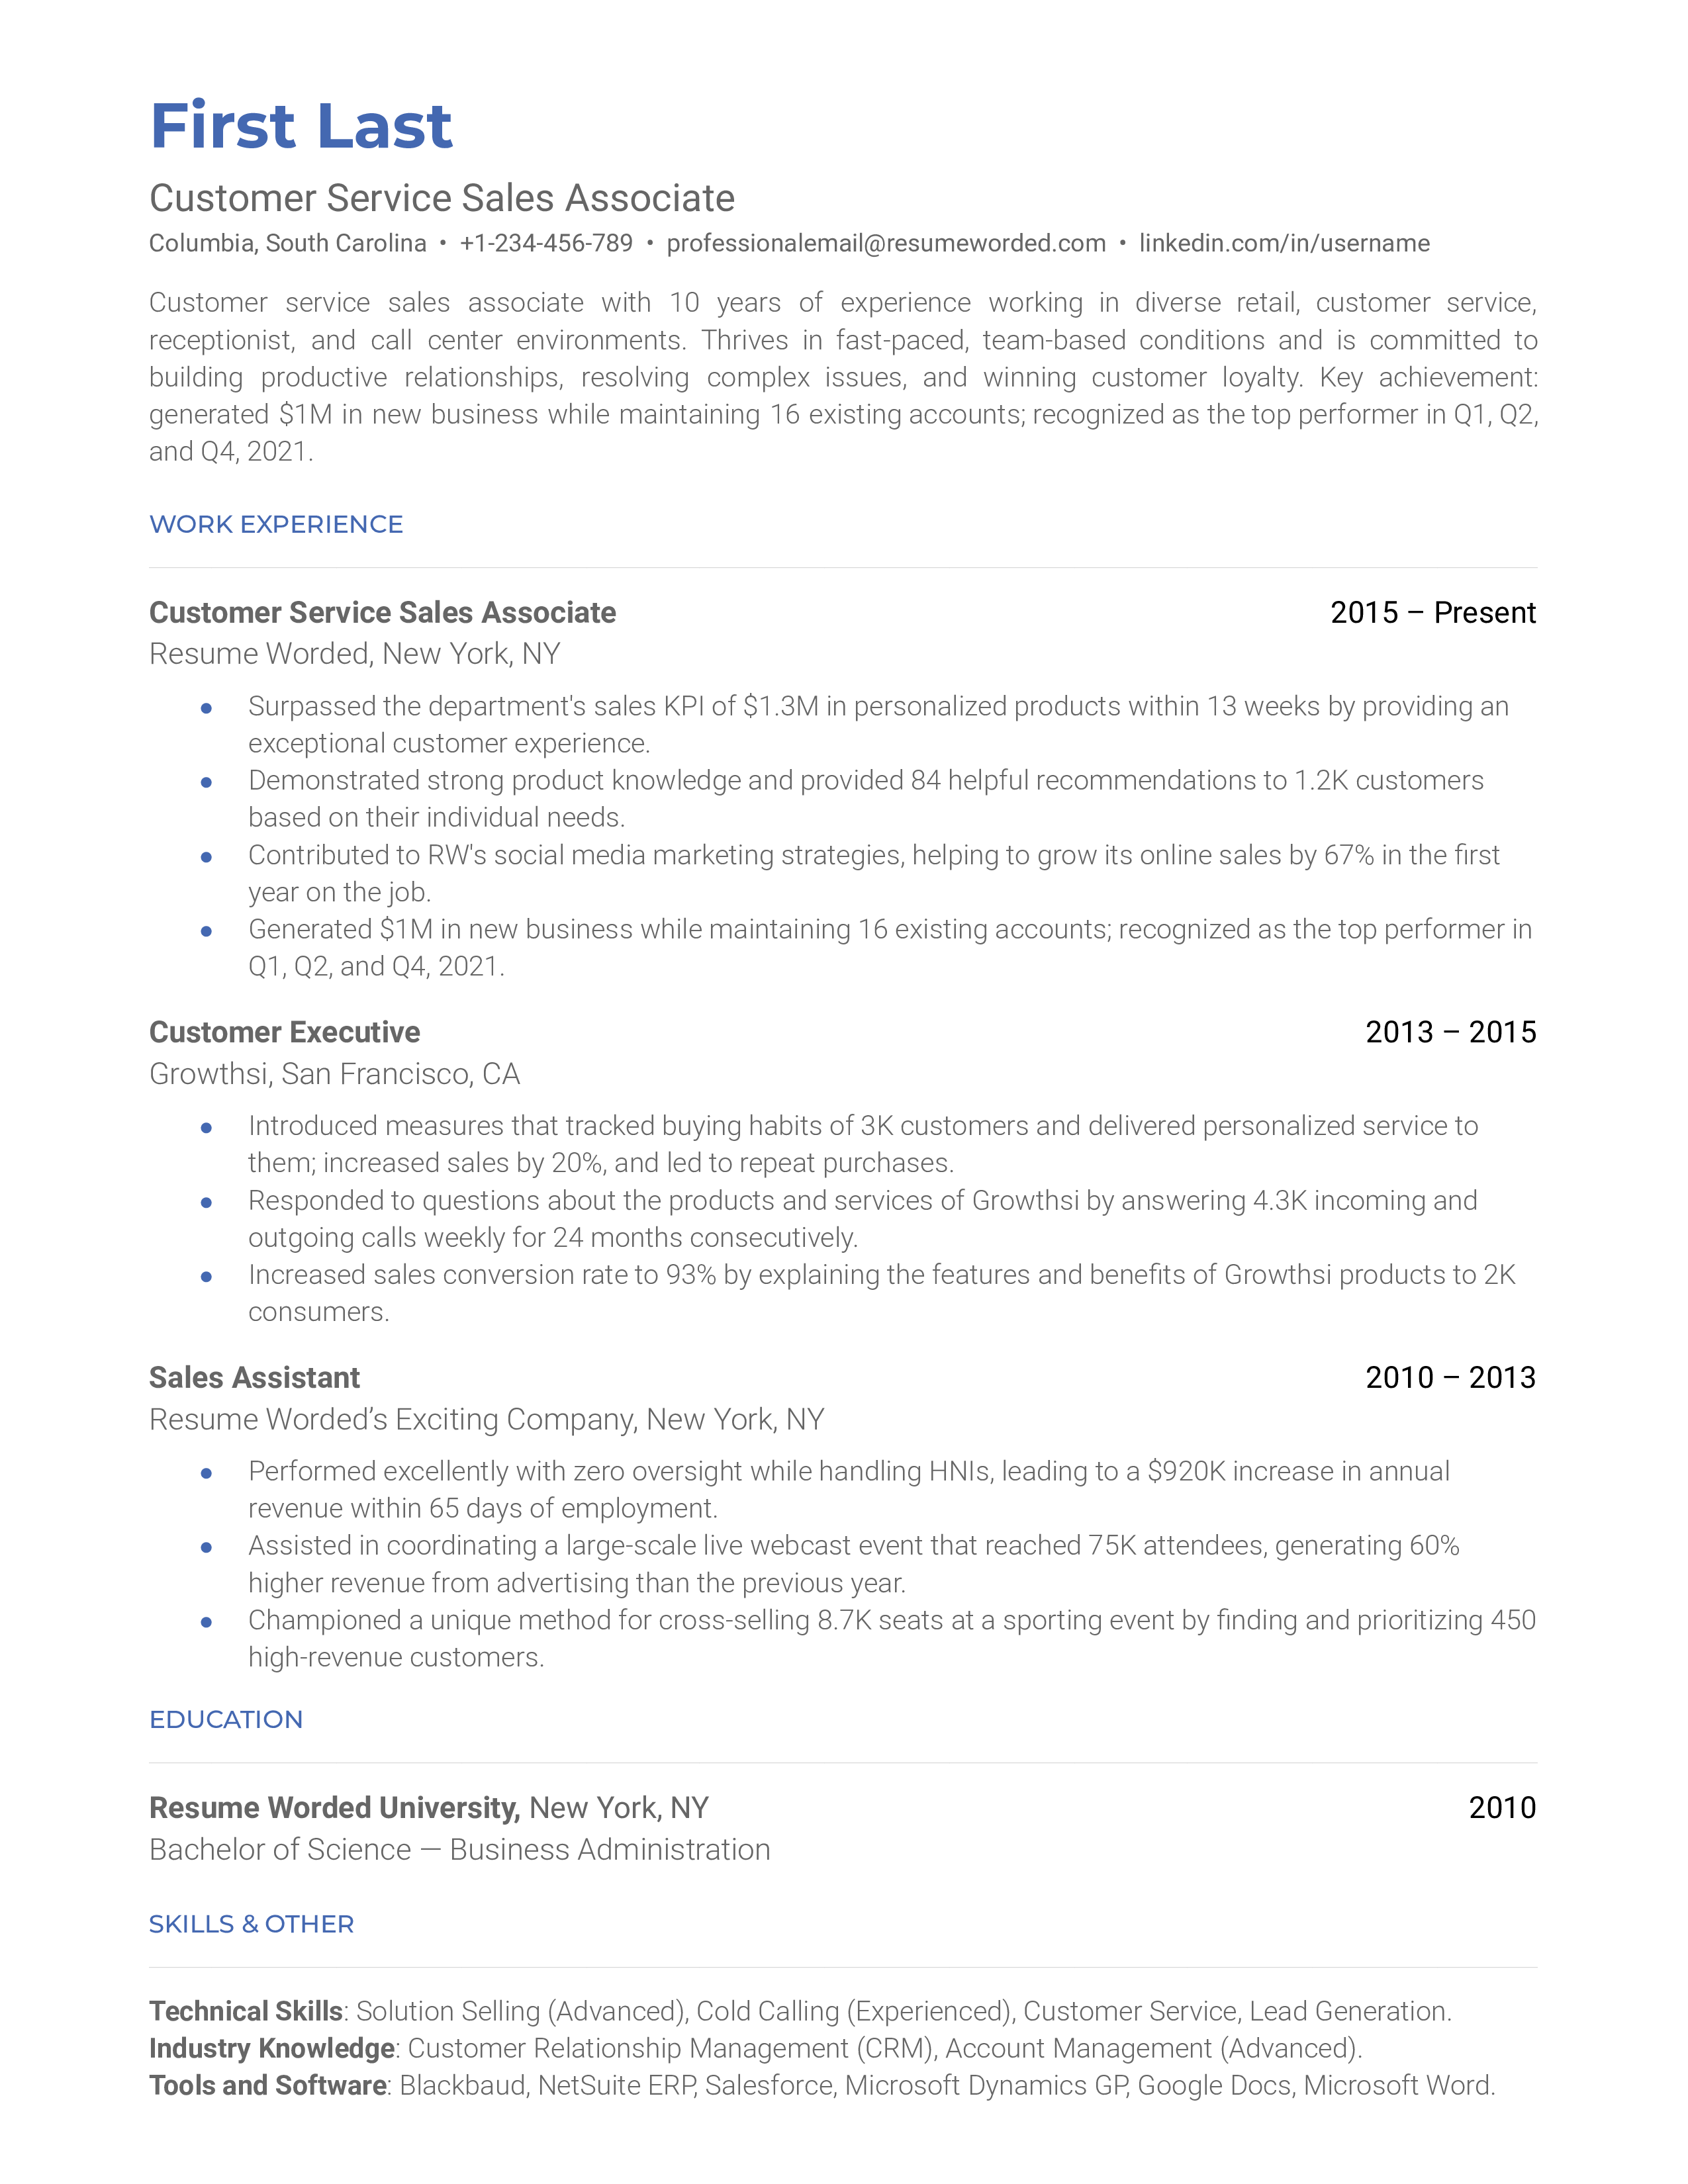 A CV showcasing relevant skills and experiences for a Customer Service Sales Associate role.